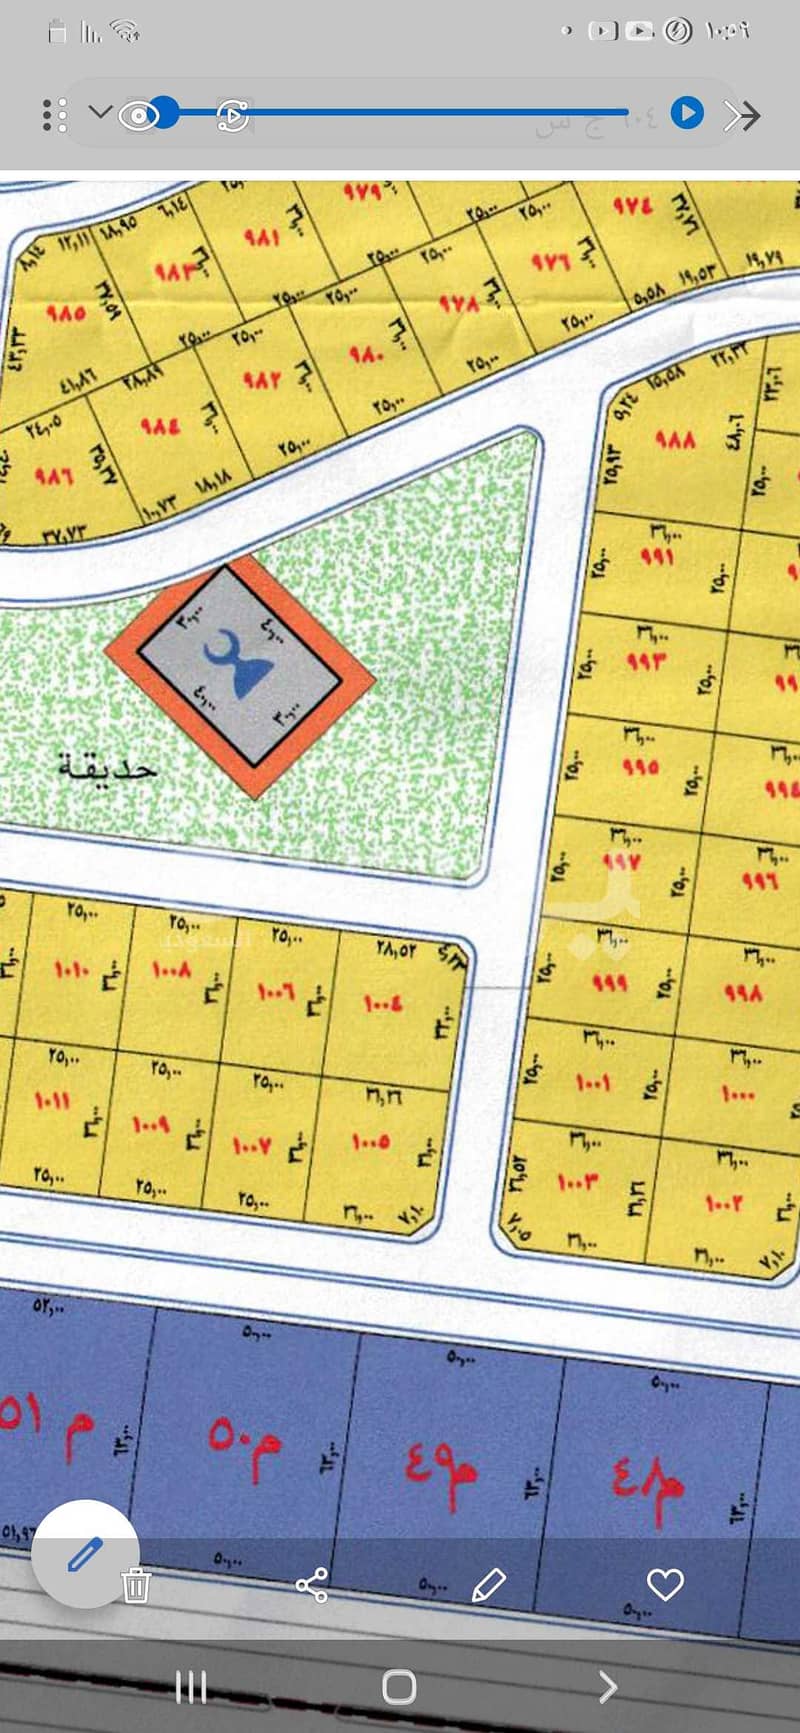 Residential Land For Sale In Taiba District, North of Jeddah